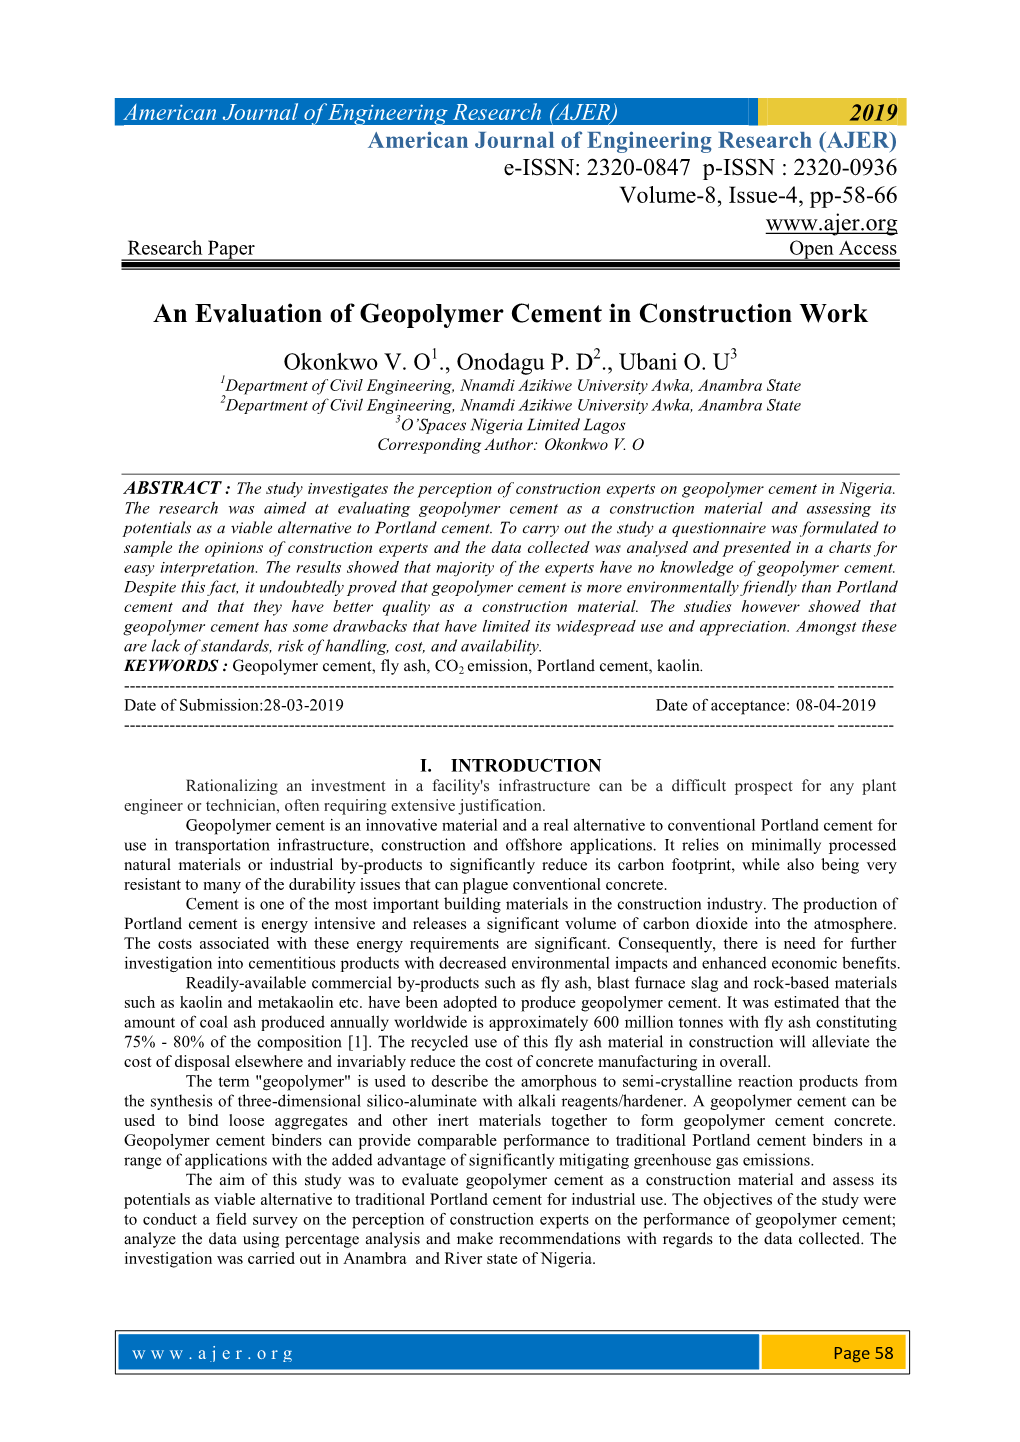 An Evaluation of Geopolymer Cement in Construction Work